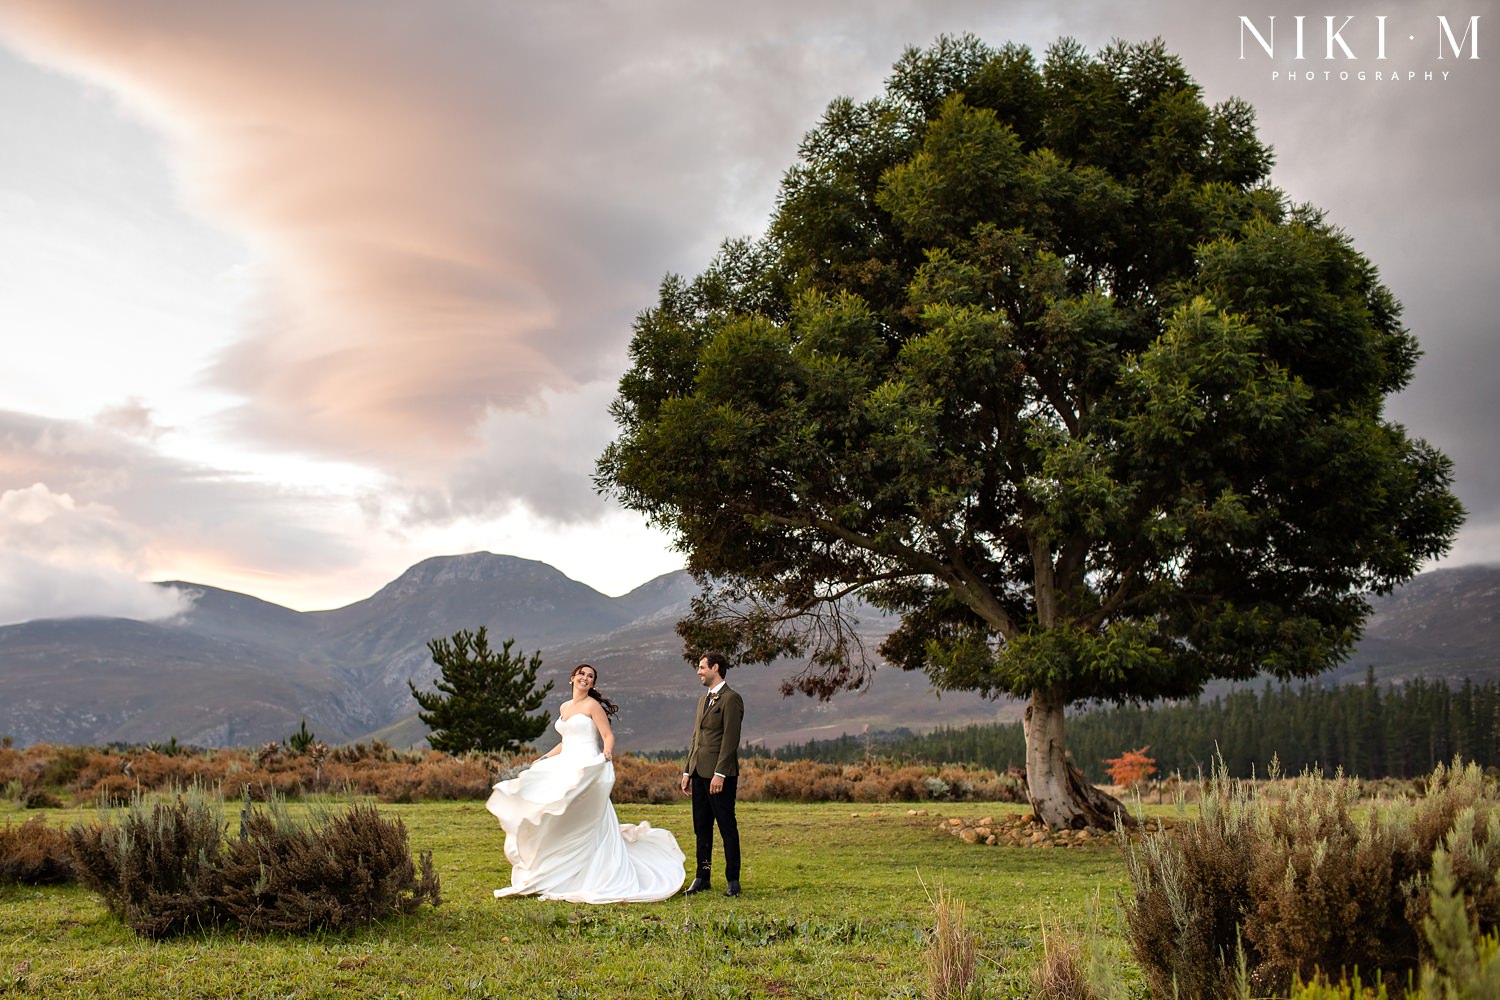 The bride spins in a field in her beautiful Fender Bridal dress, with a big tree and sunset mountains in the background. A stunning backdrop for anyone wanting to have an Elgin wedding.